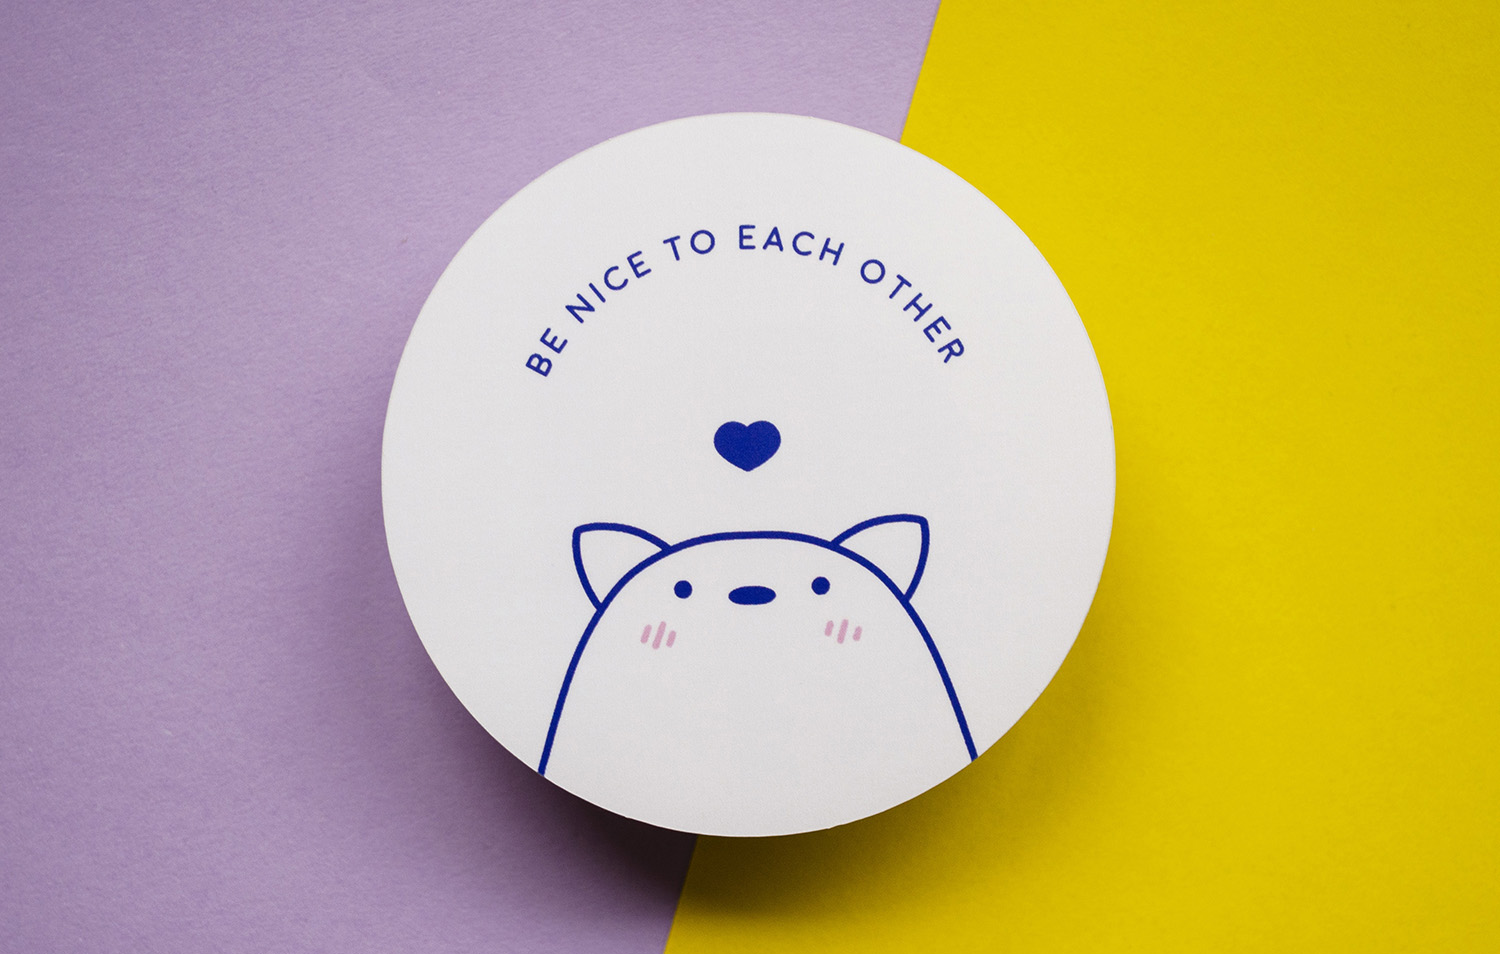 Round sticker with an animal and Be nice to each other als text on it